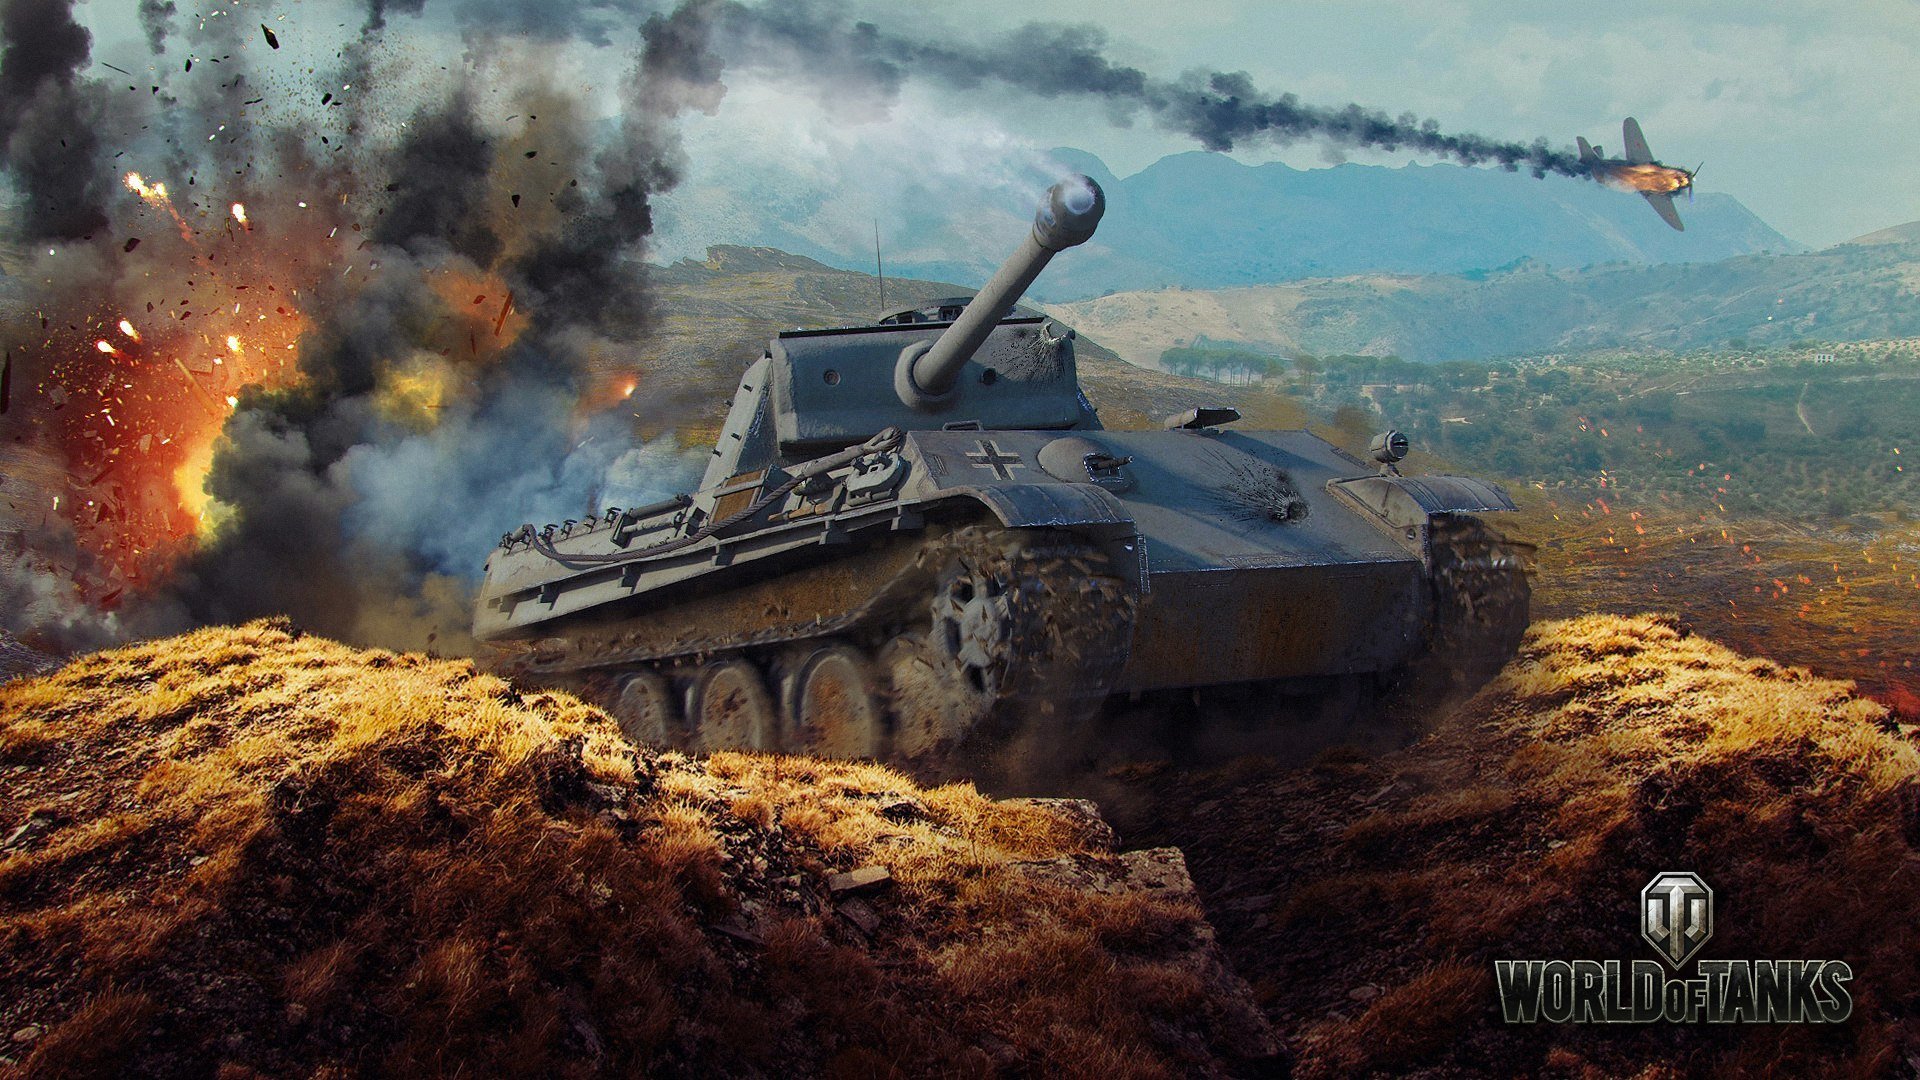 wot wallpapers 1920x1080,tank,combat vehicle,strategy video game,pc game,vehicle